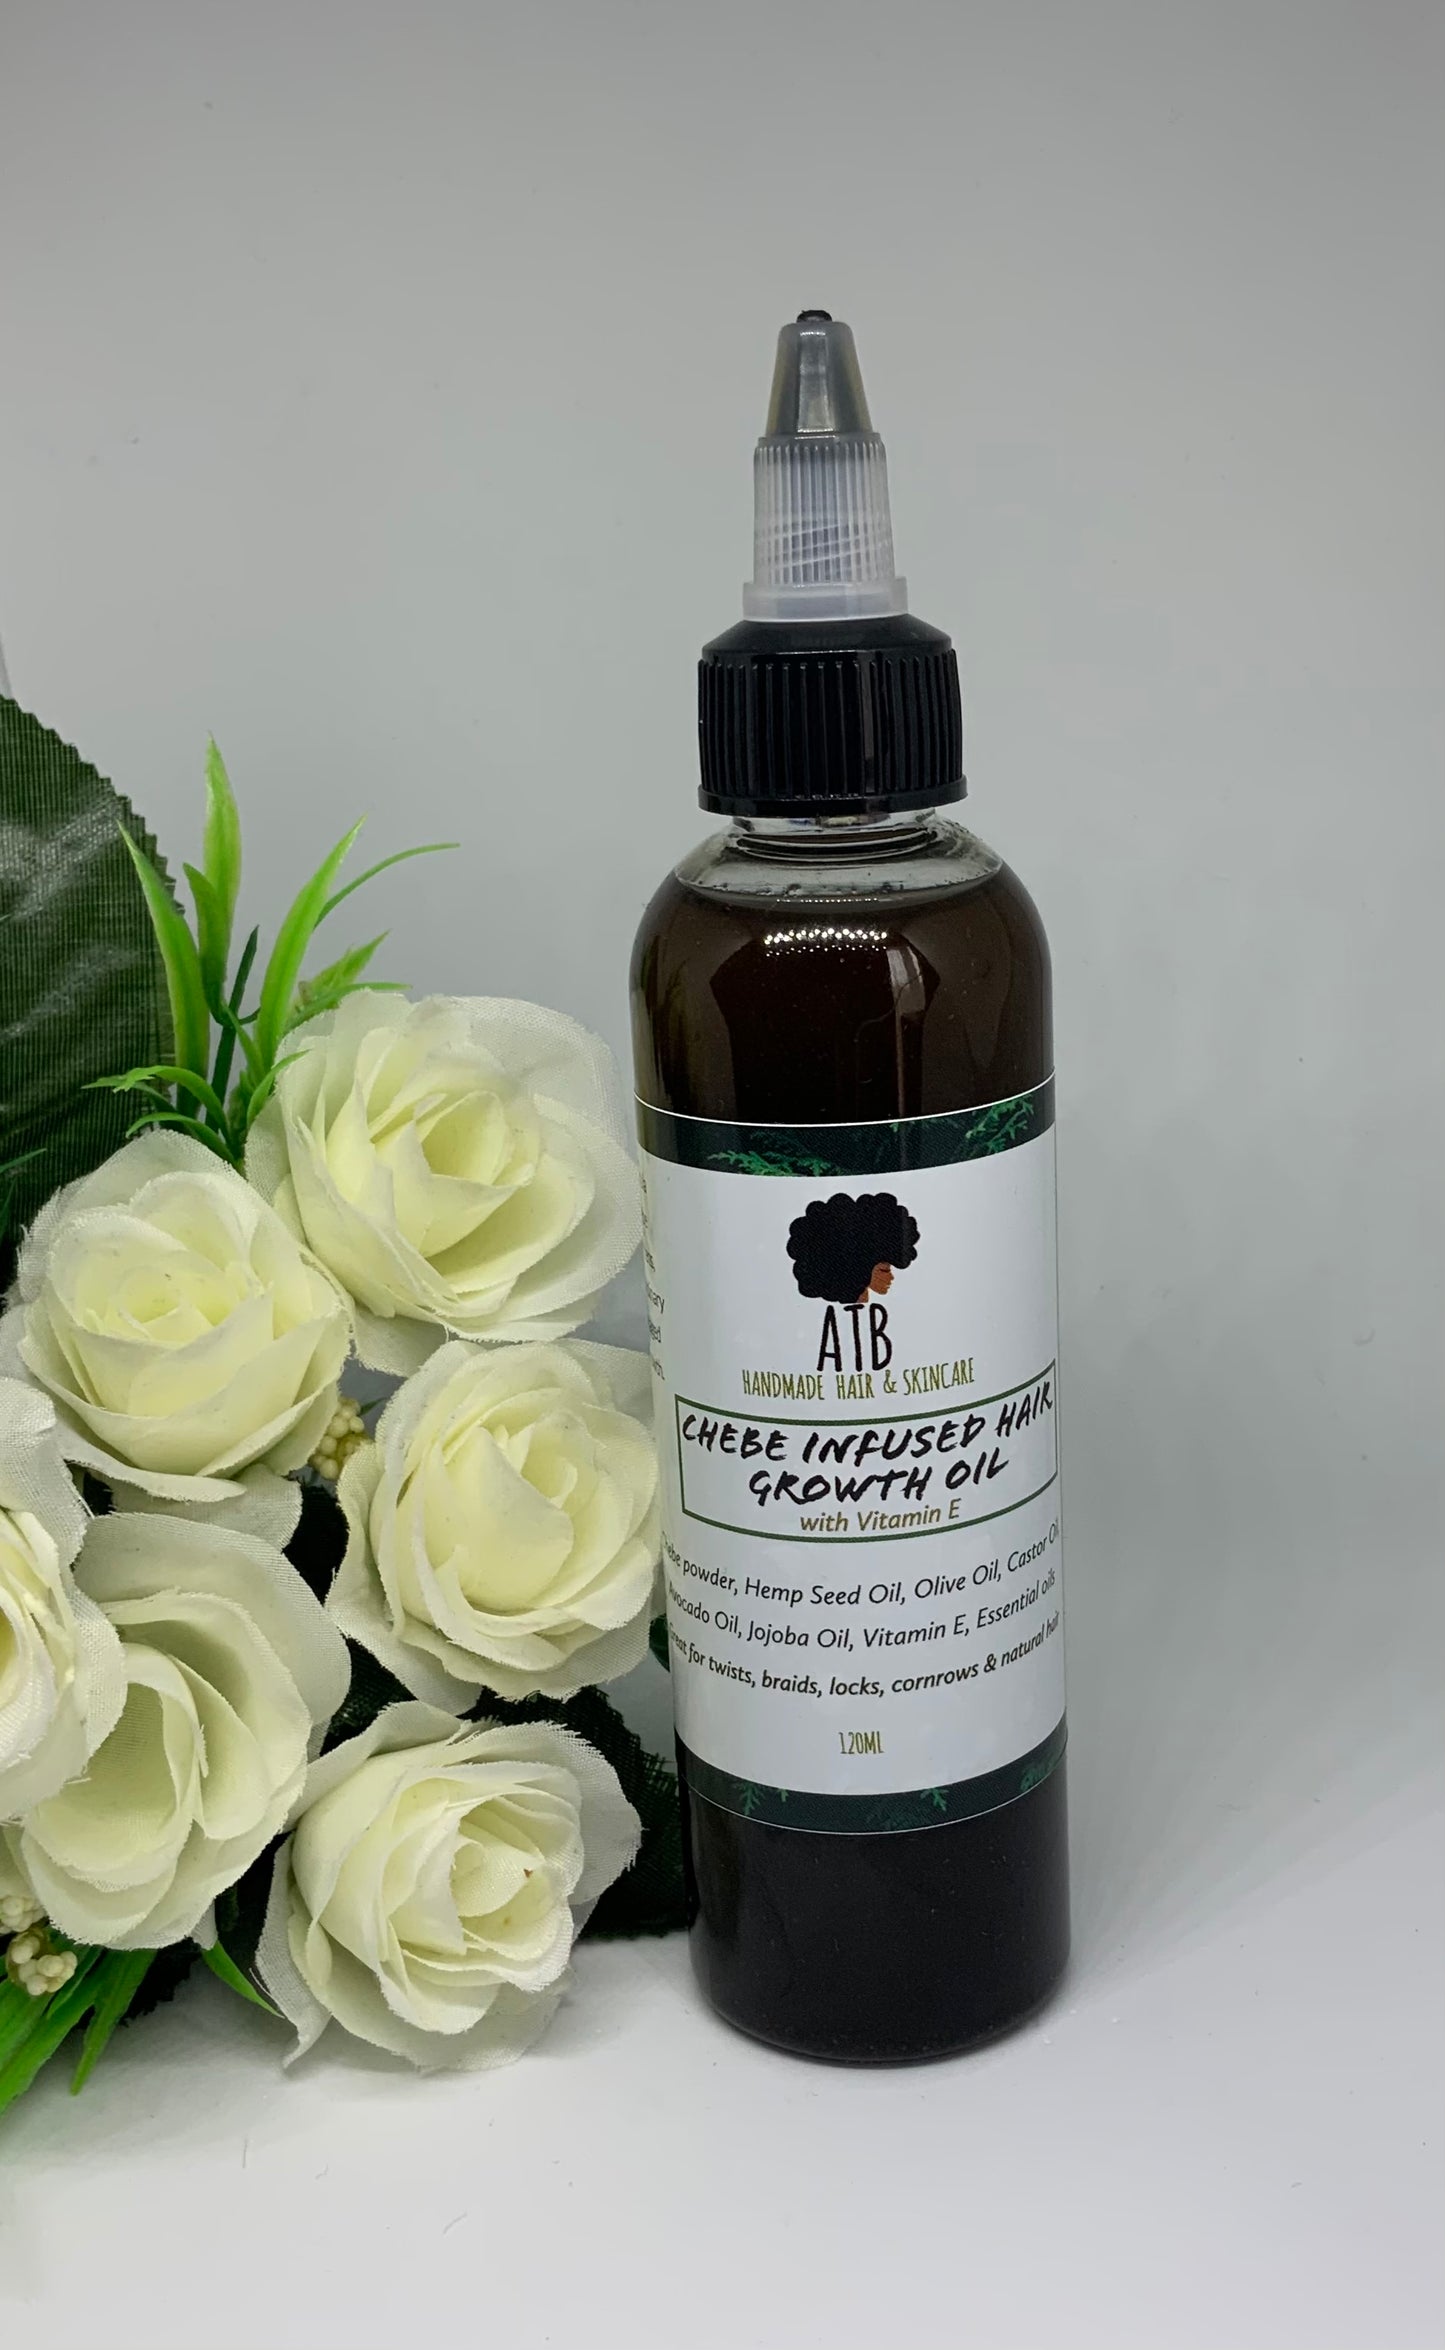 ATB Chebe infused hair growth oil